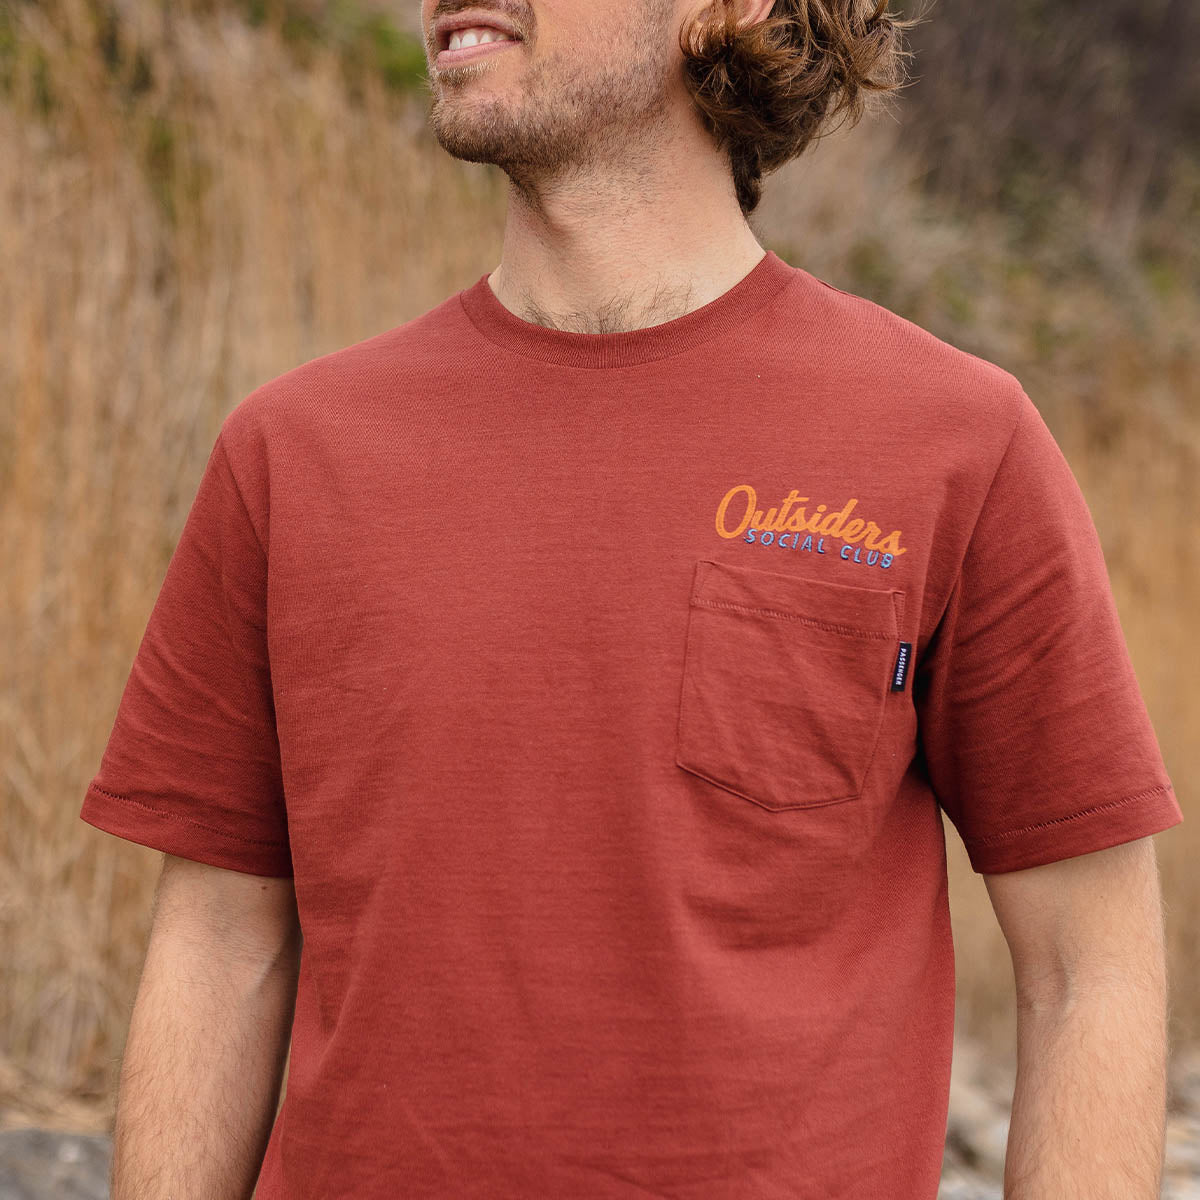 OSC Recycled Cotton Pocket T-Shirt - Russet